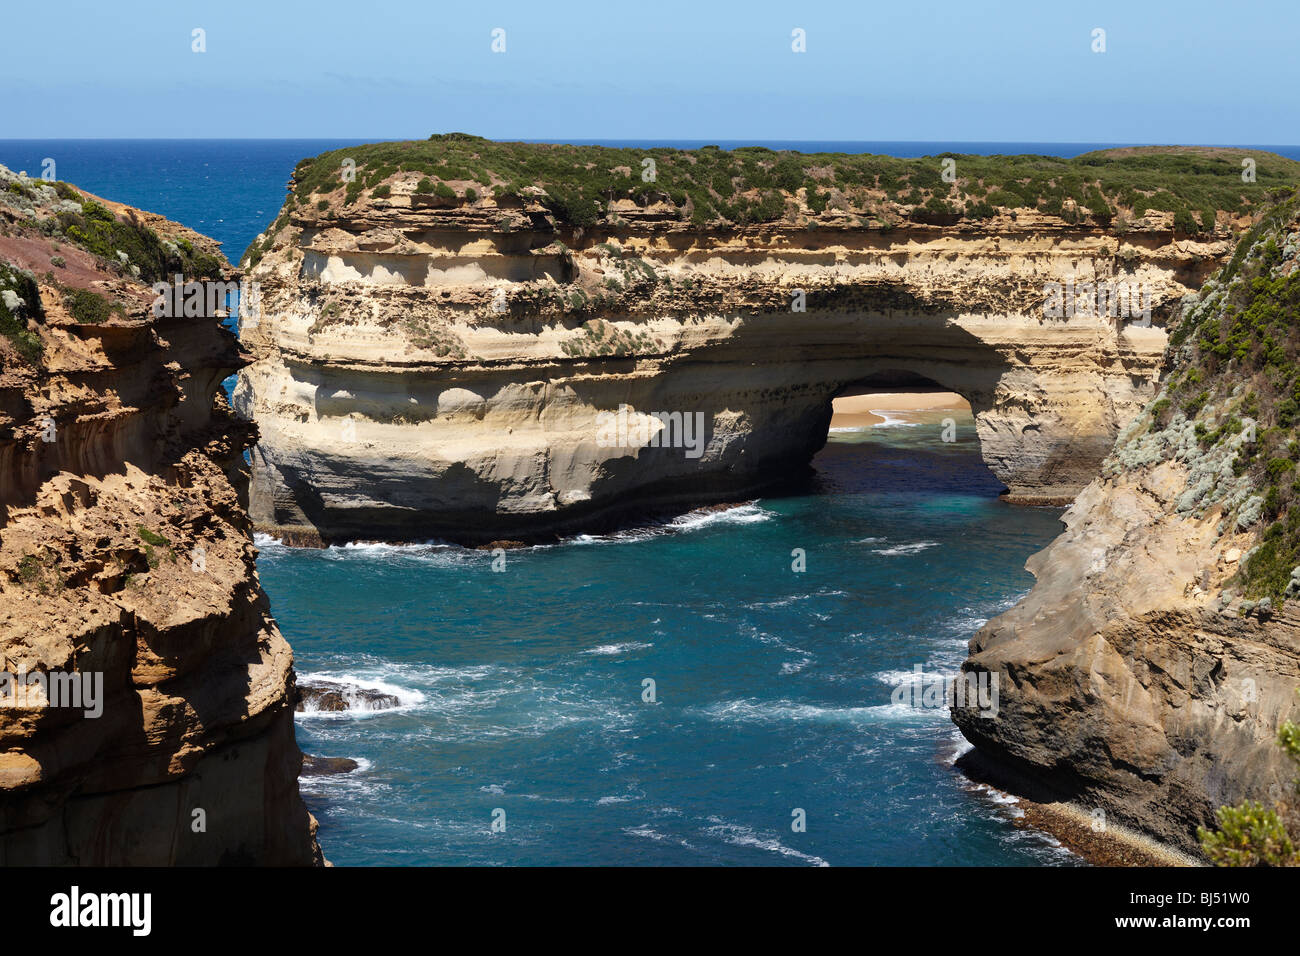 Spectacular coastal scenery at Loch Ard Gorge, Port Campbell National Park, Great Ocean Road, Victoria, Australia Stock Photo